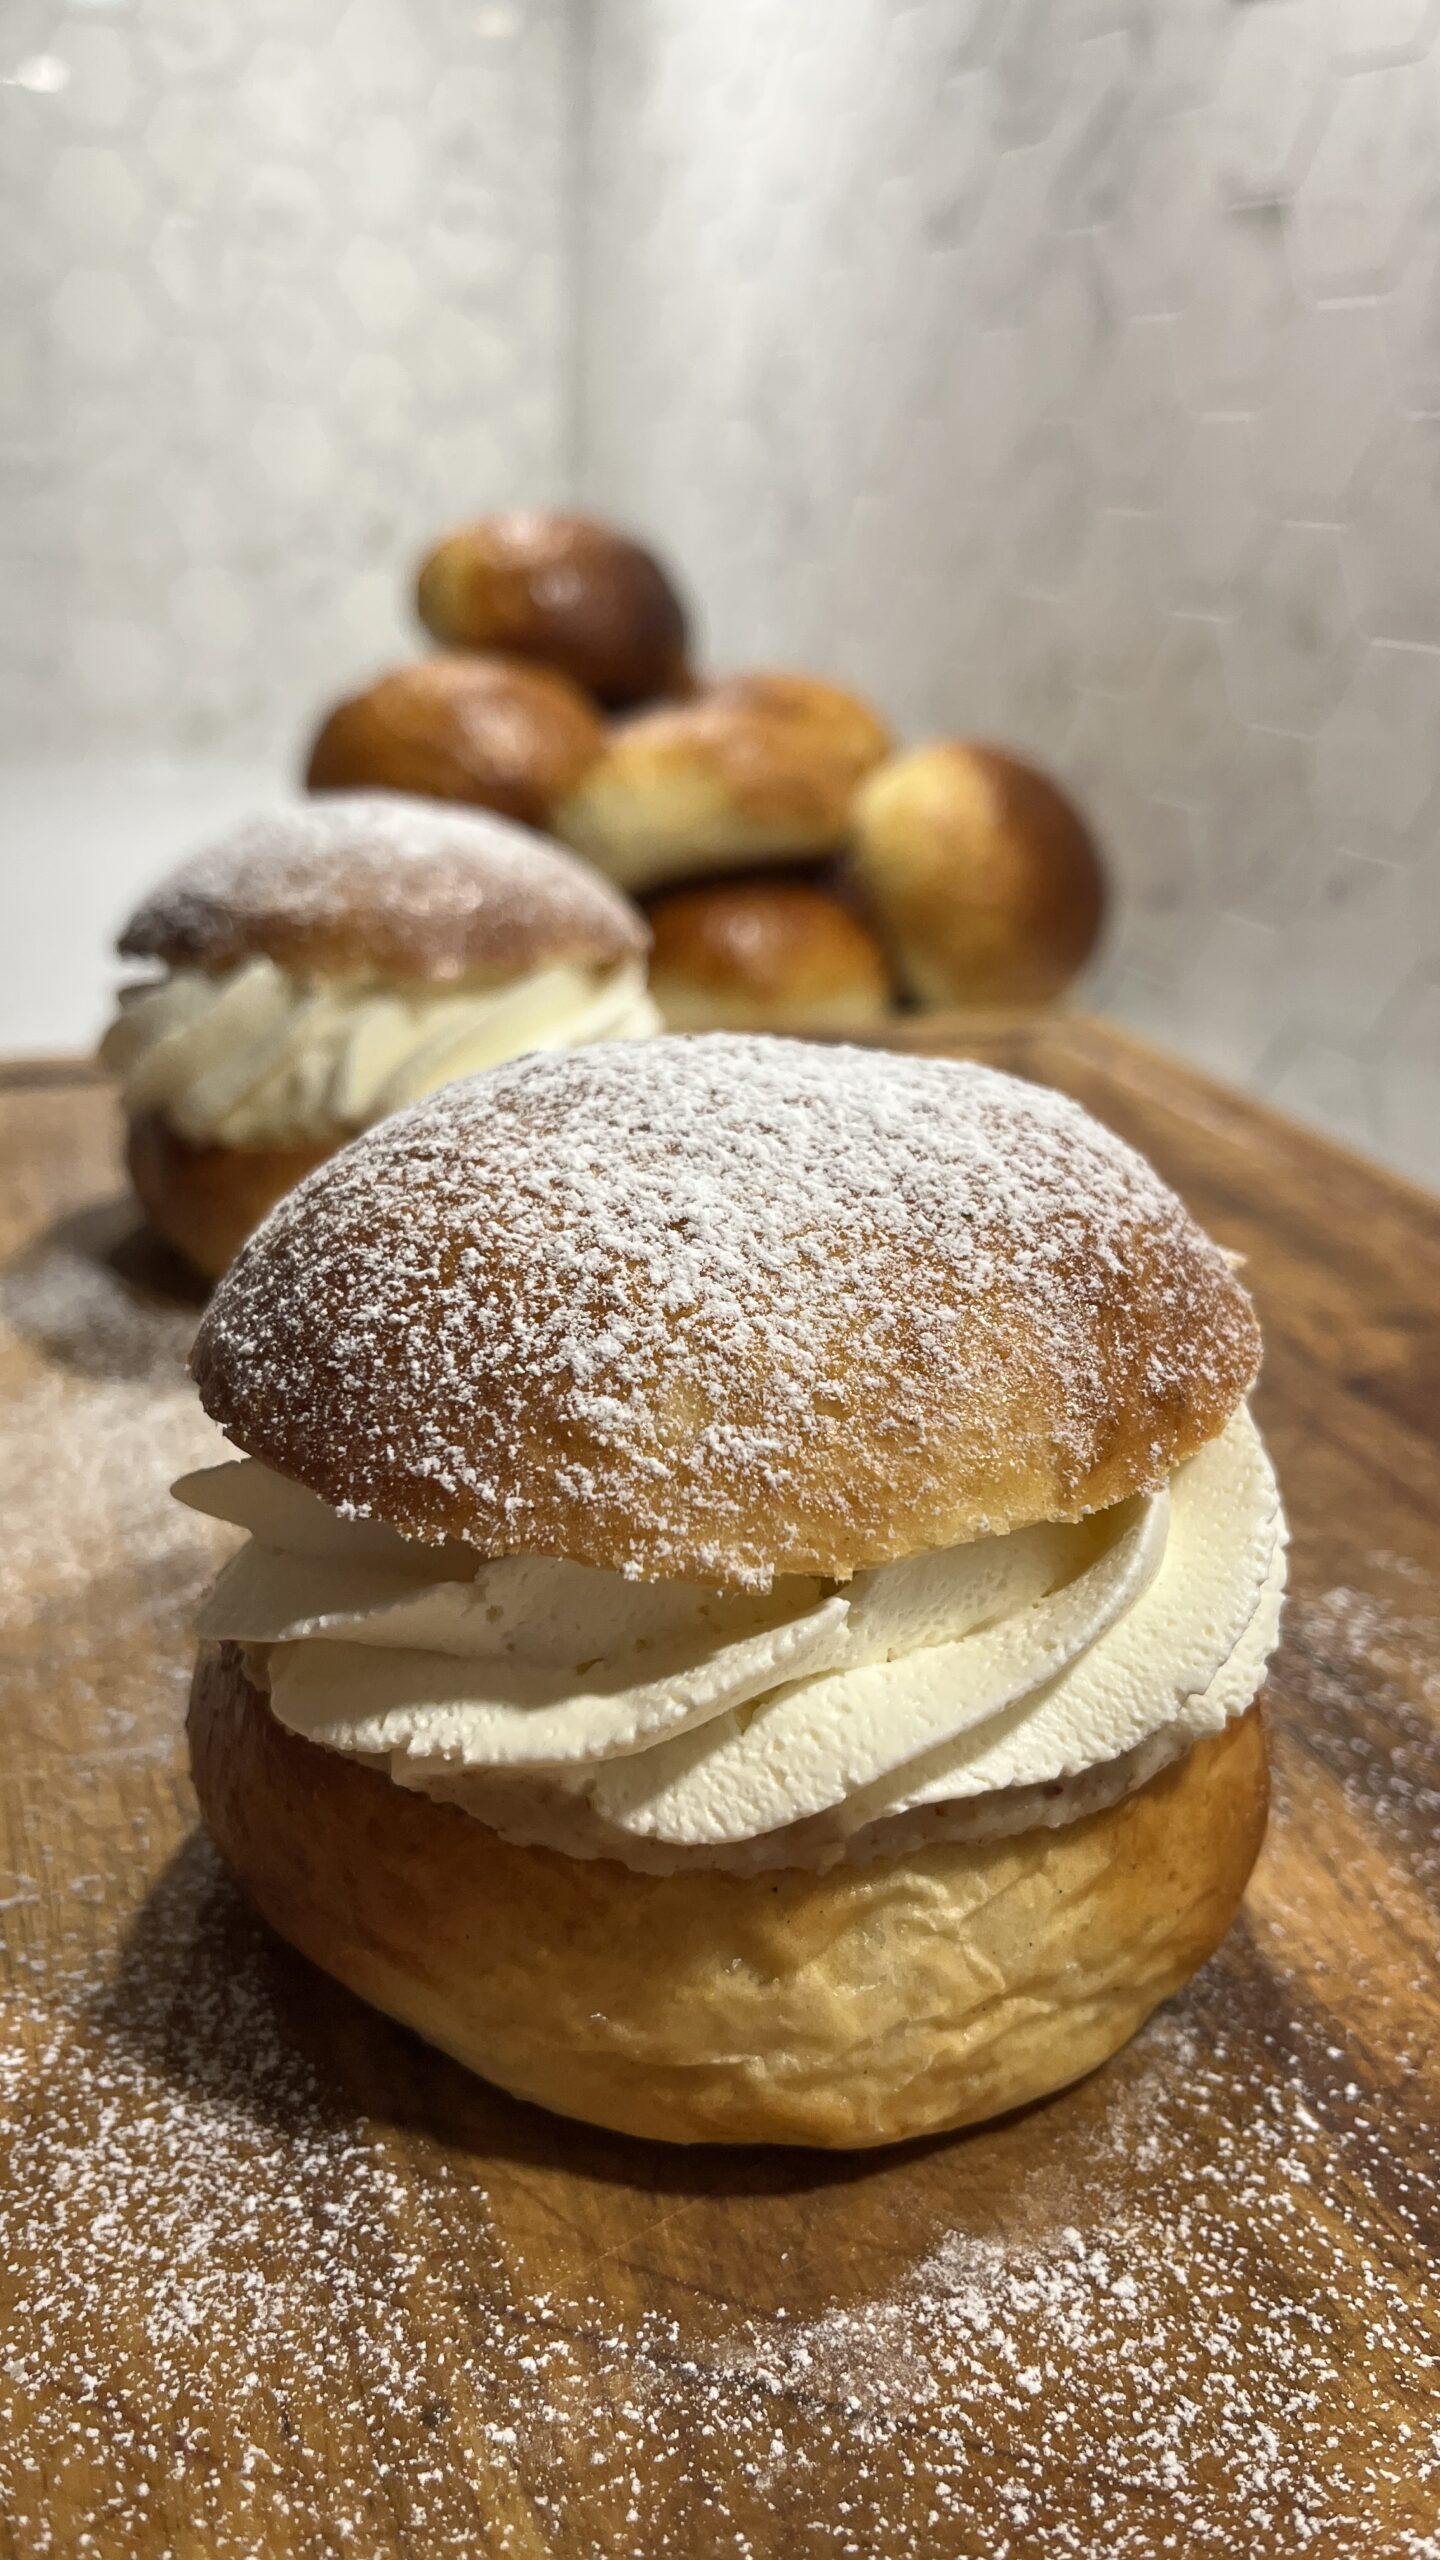 A semla with whipped cream and powdered sugar.